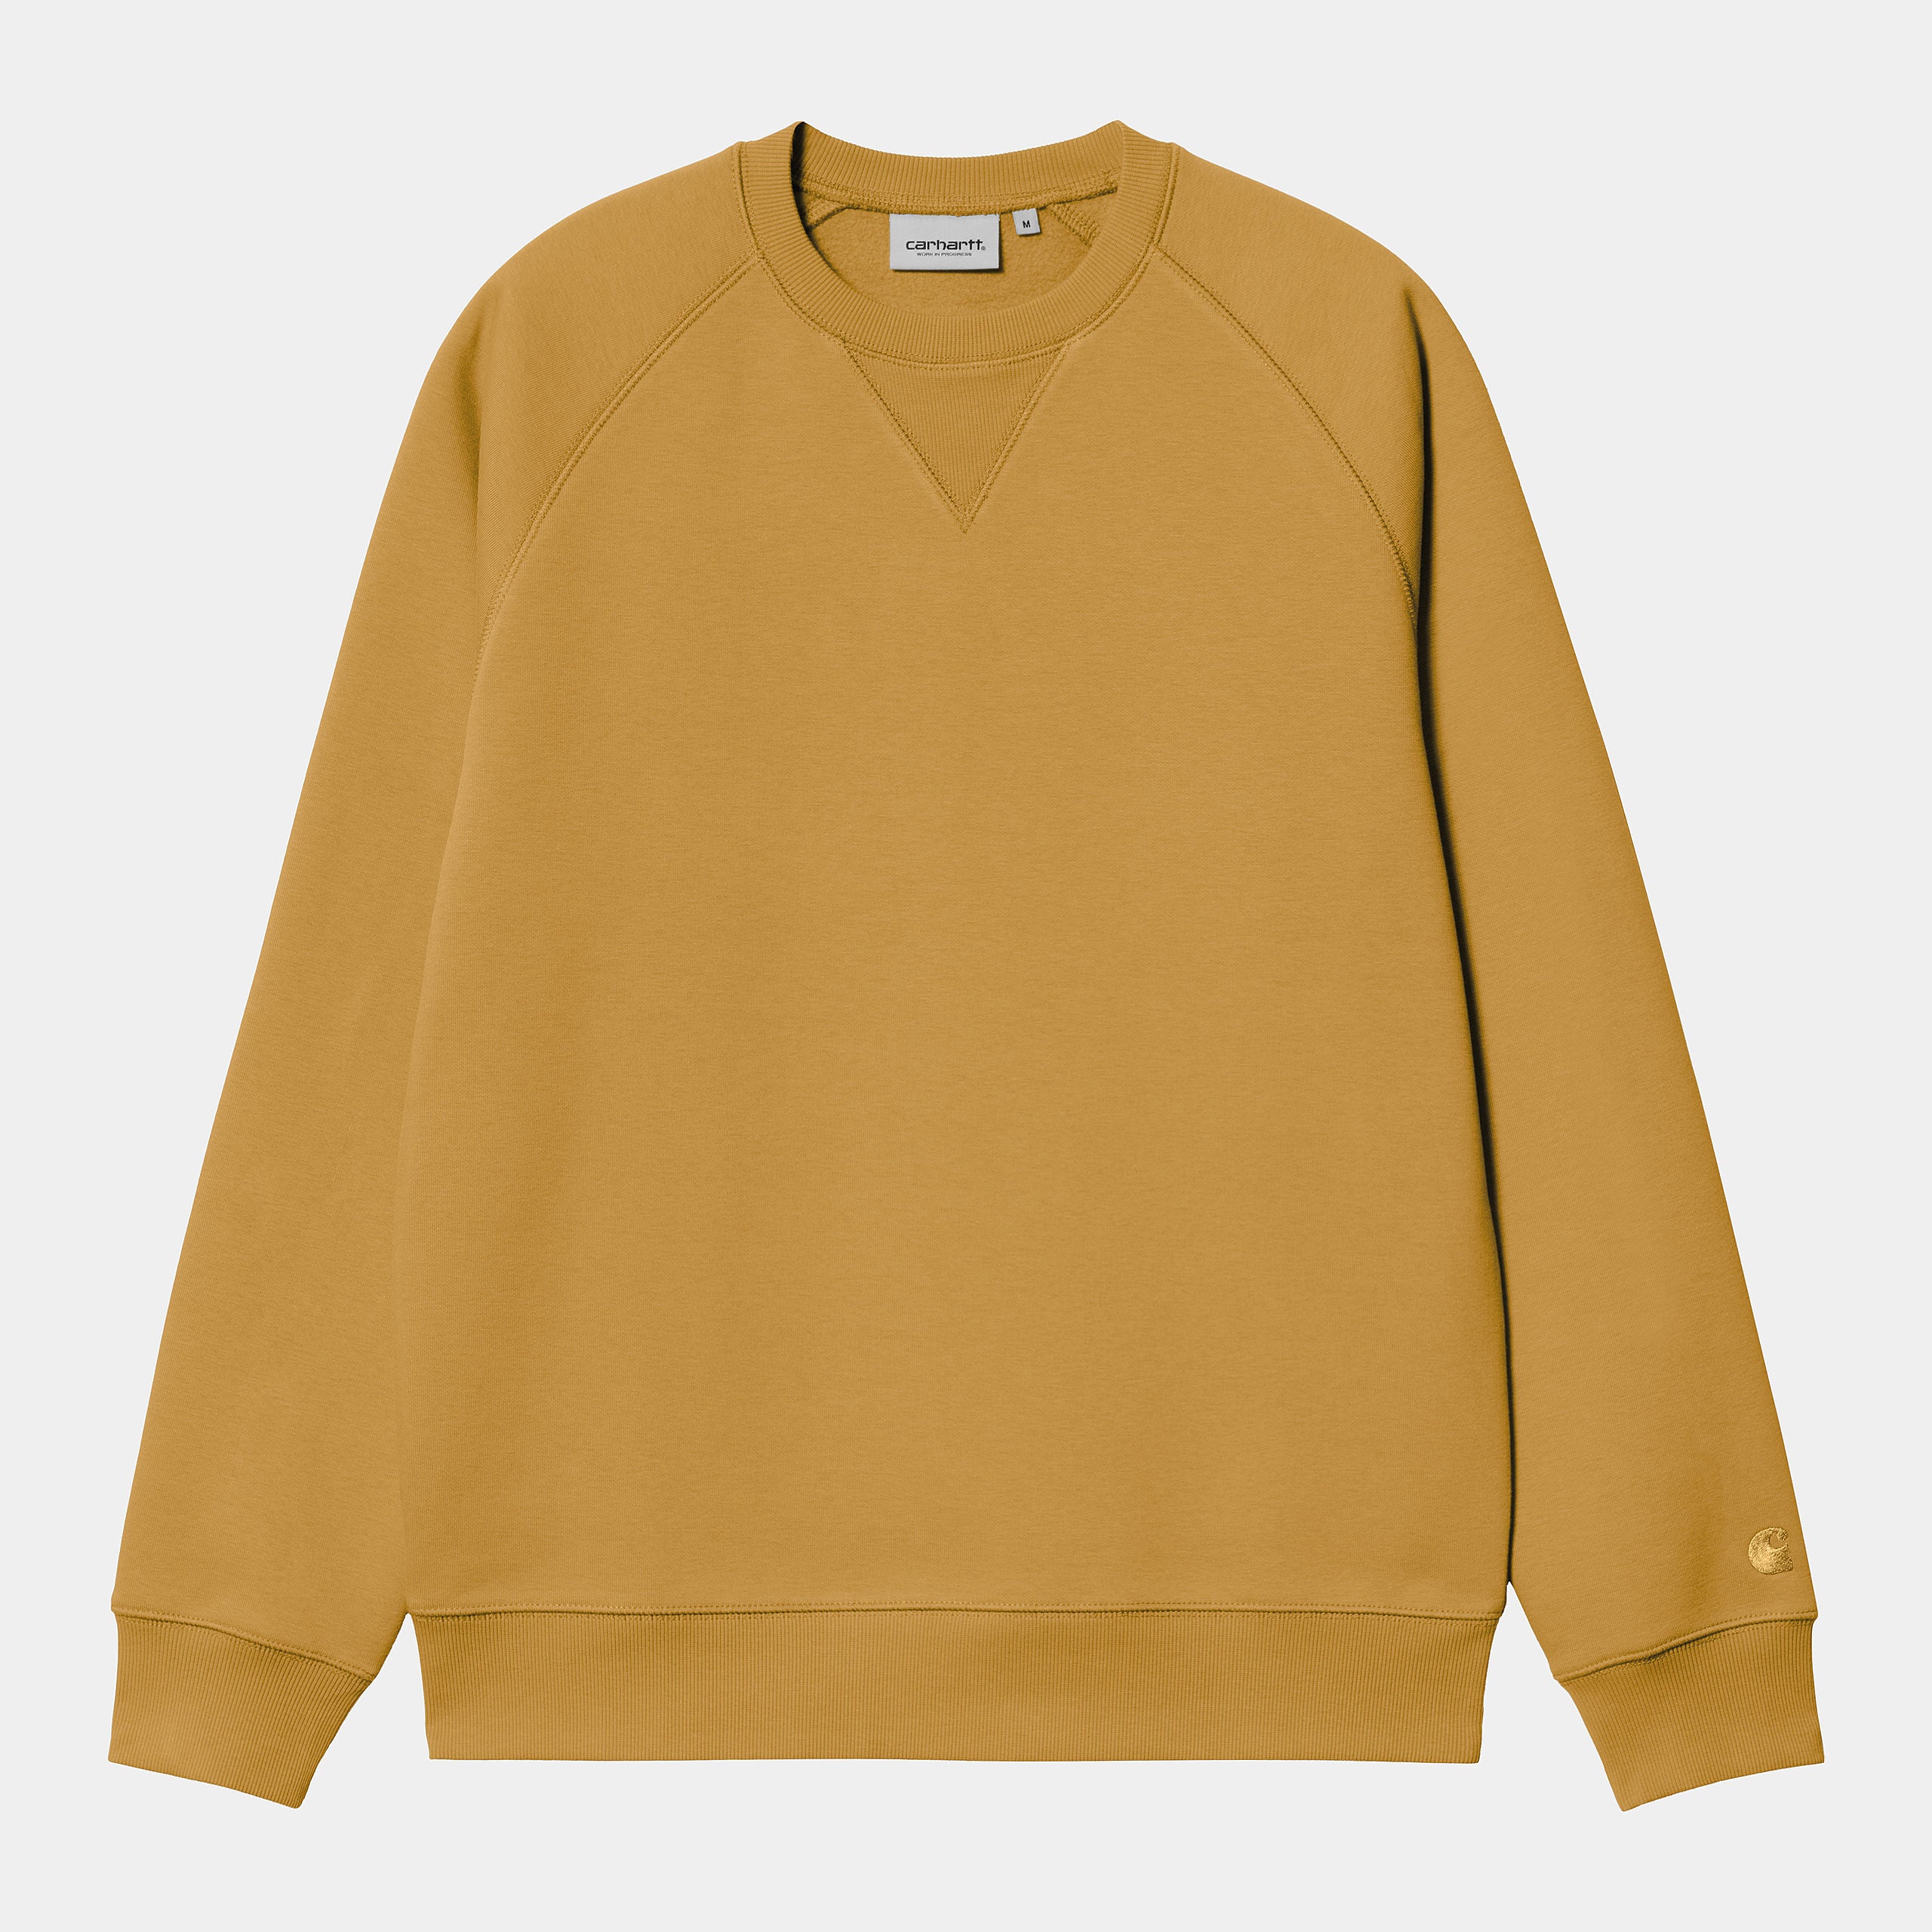 chase-sweat-sunray-gold-77_png.jpg